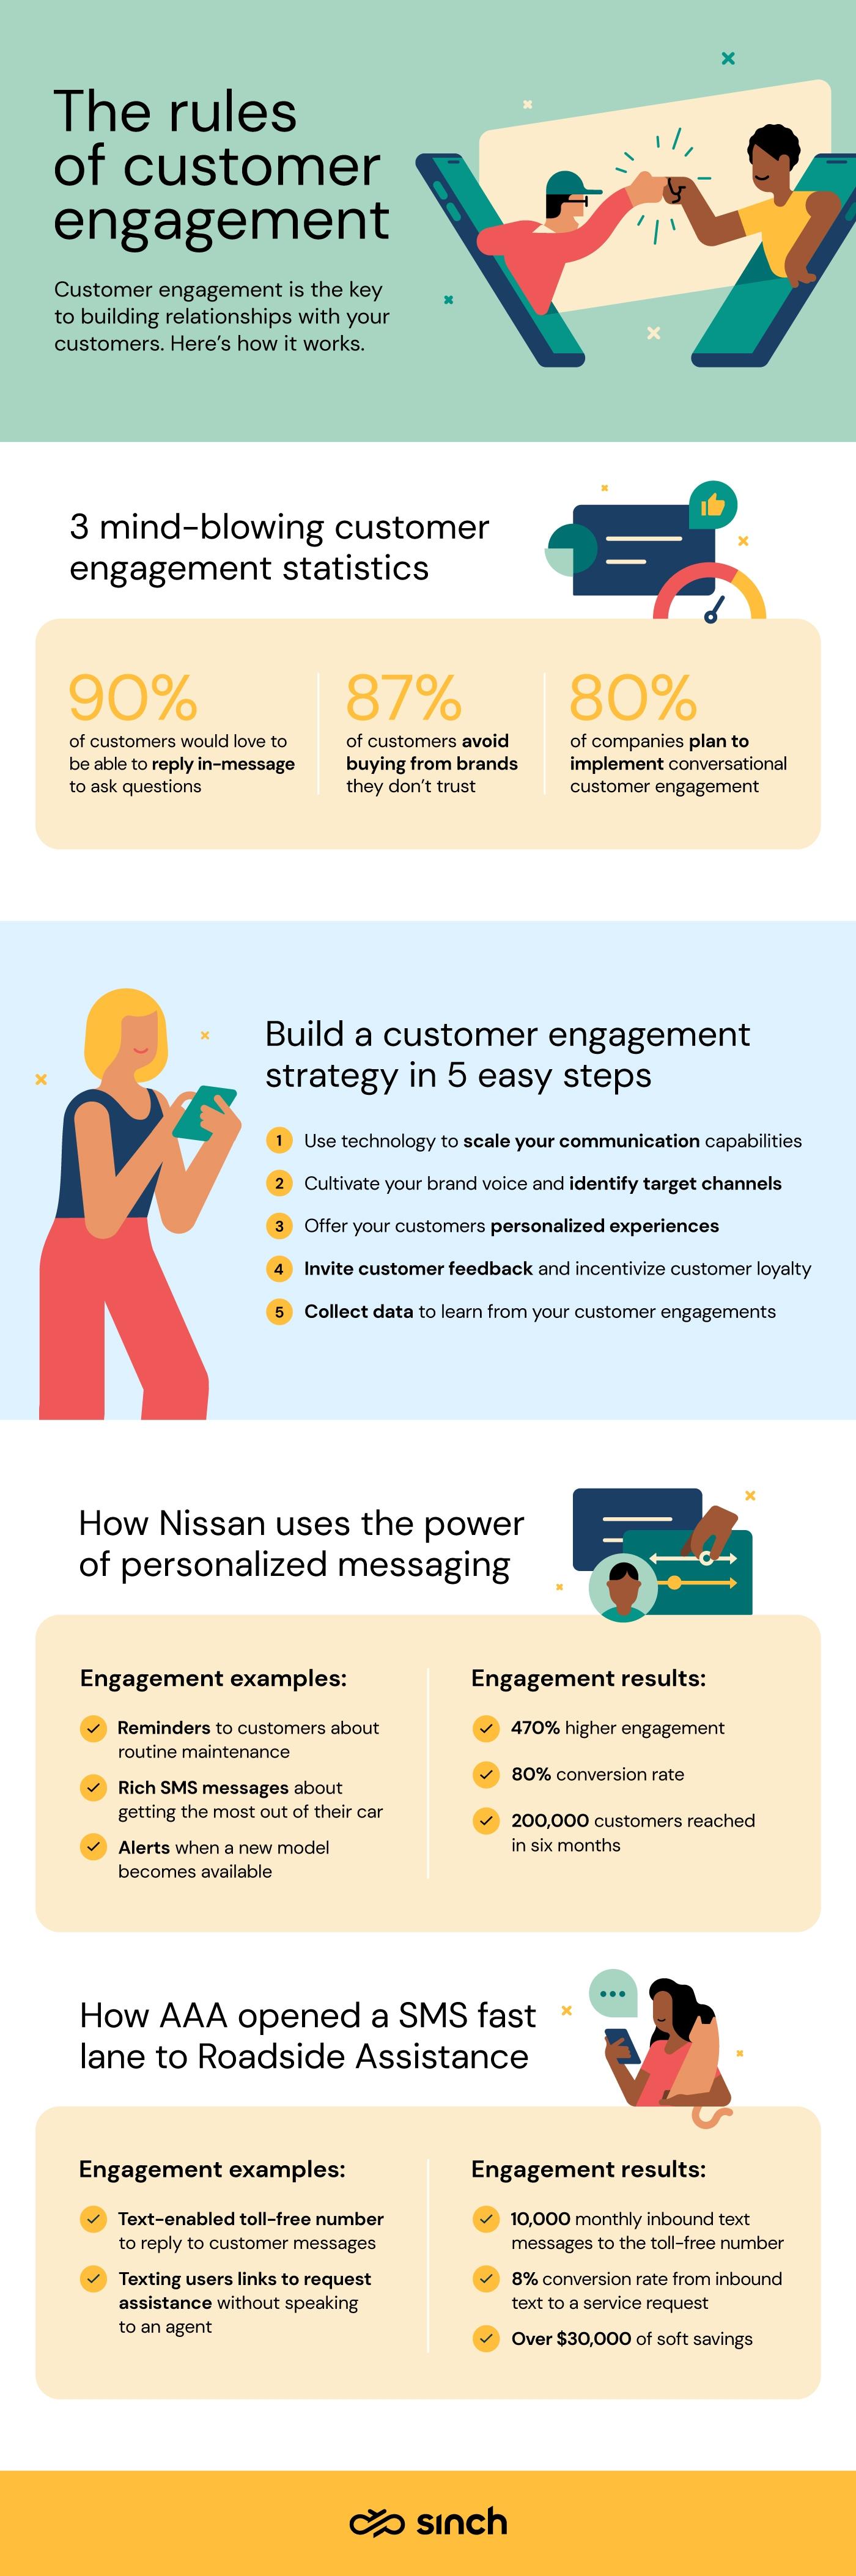 Infographic shows how customer engagement works and includes data that demonstrates its positive impact for businesses